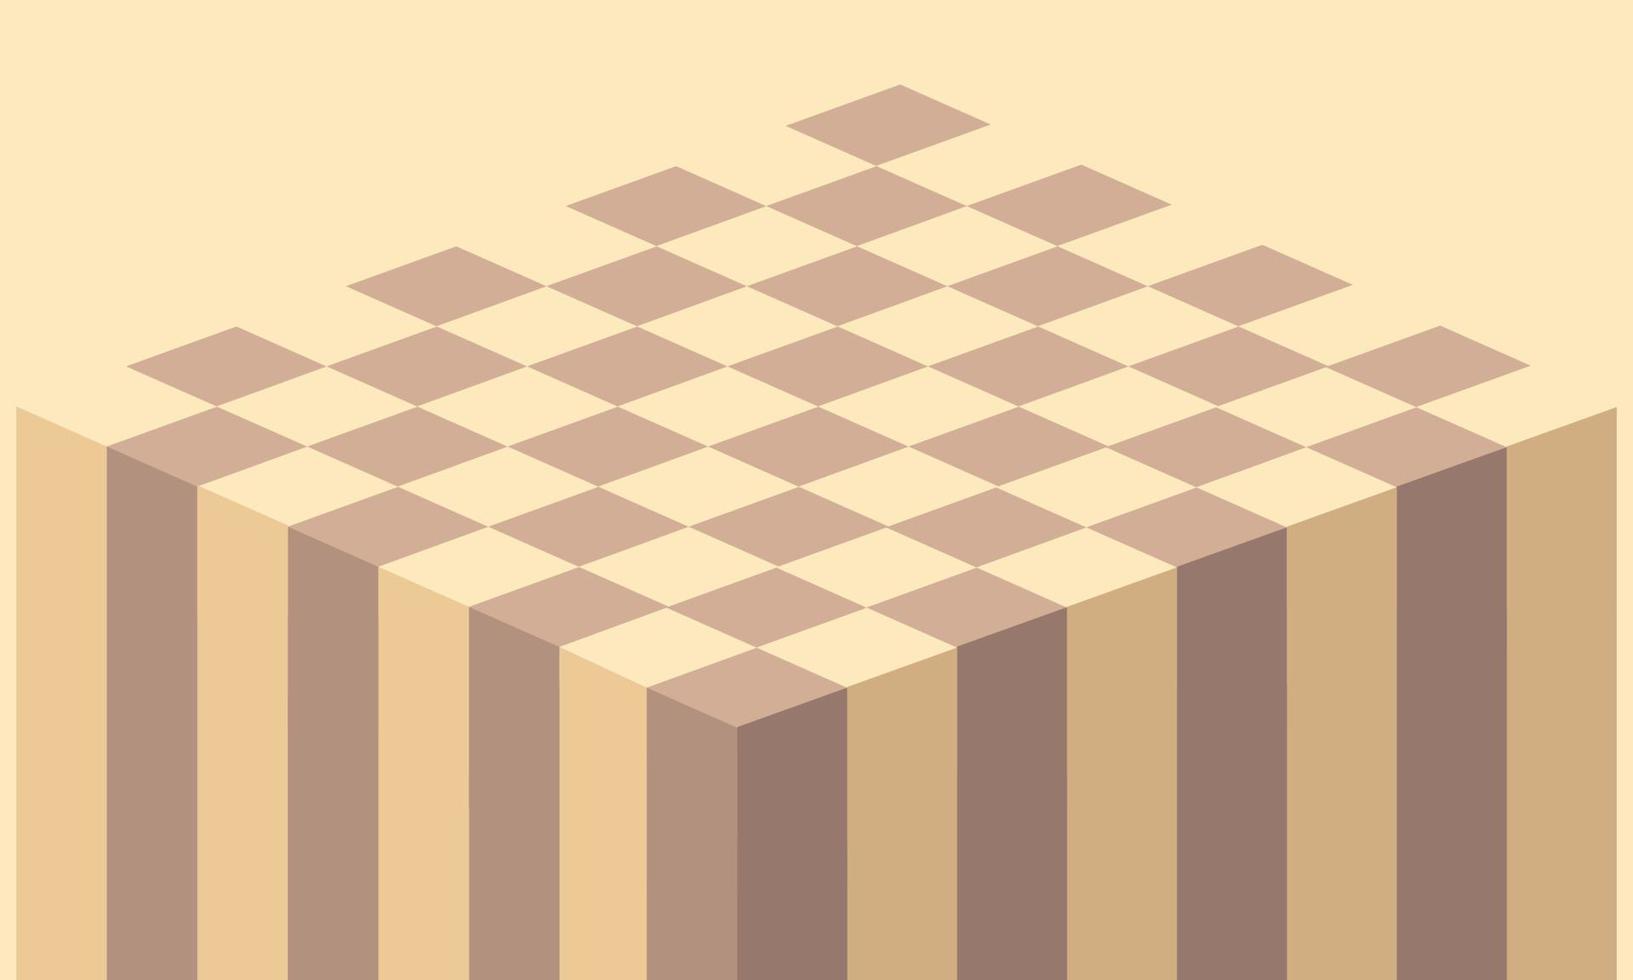 Abstract background with a cube chessboard. Background for text and chess games. A strategic sports game. Vector illustration. A checkered board made of wood with a thickness going down